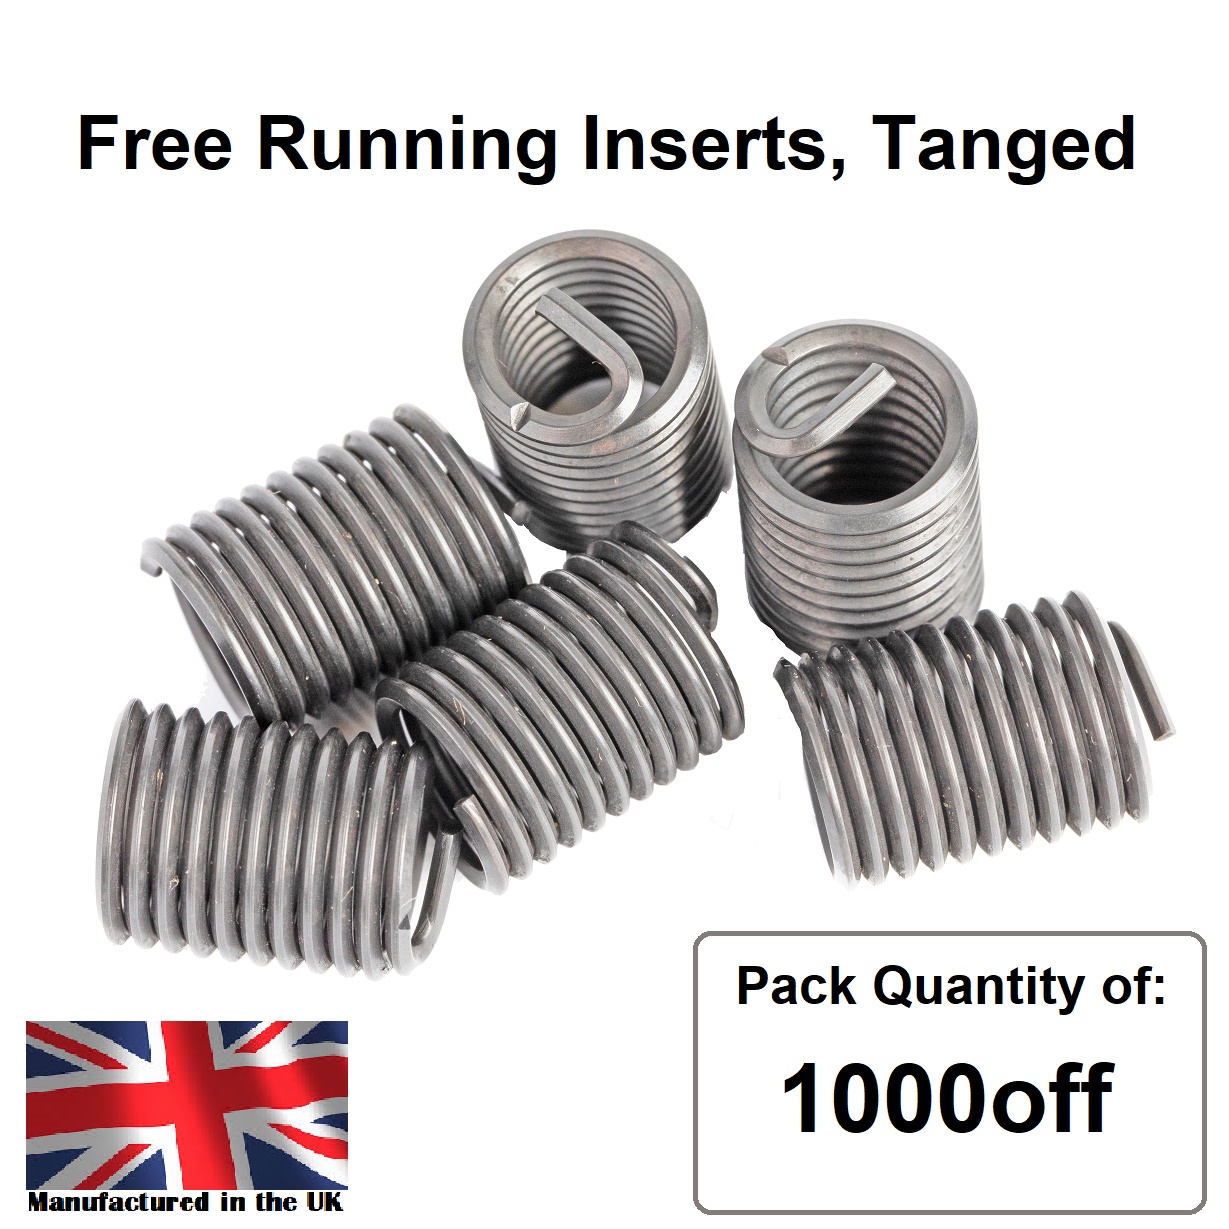 M12 x 1.75 x 1D Metric Coarse, Free Running, Tanged, Wire Thread Repair Insert, 304/A2 Stainless (Pack 1000)